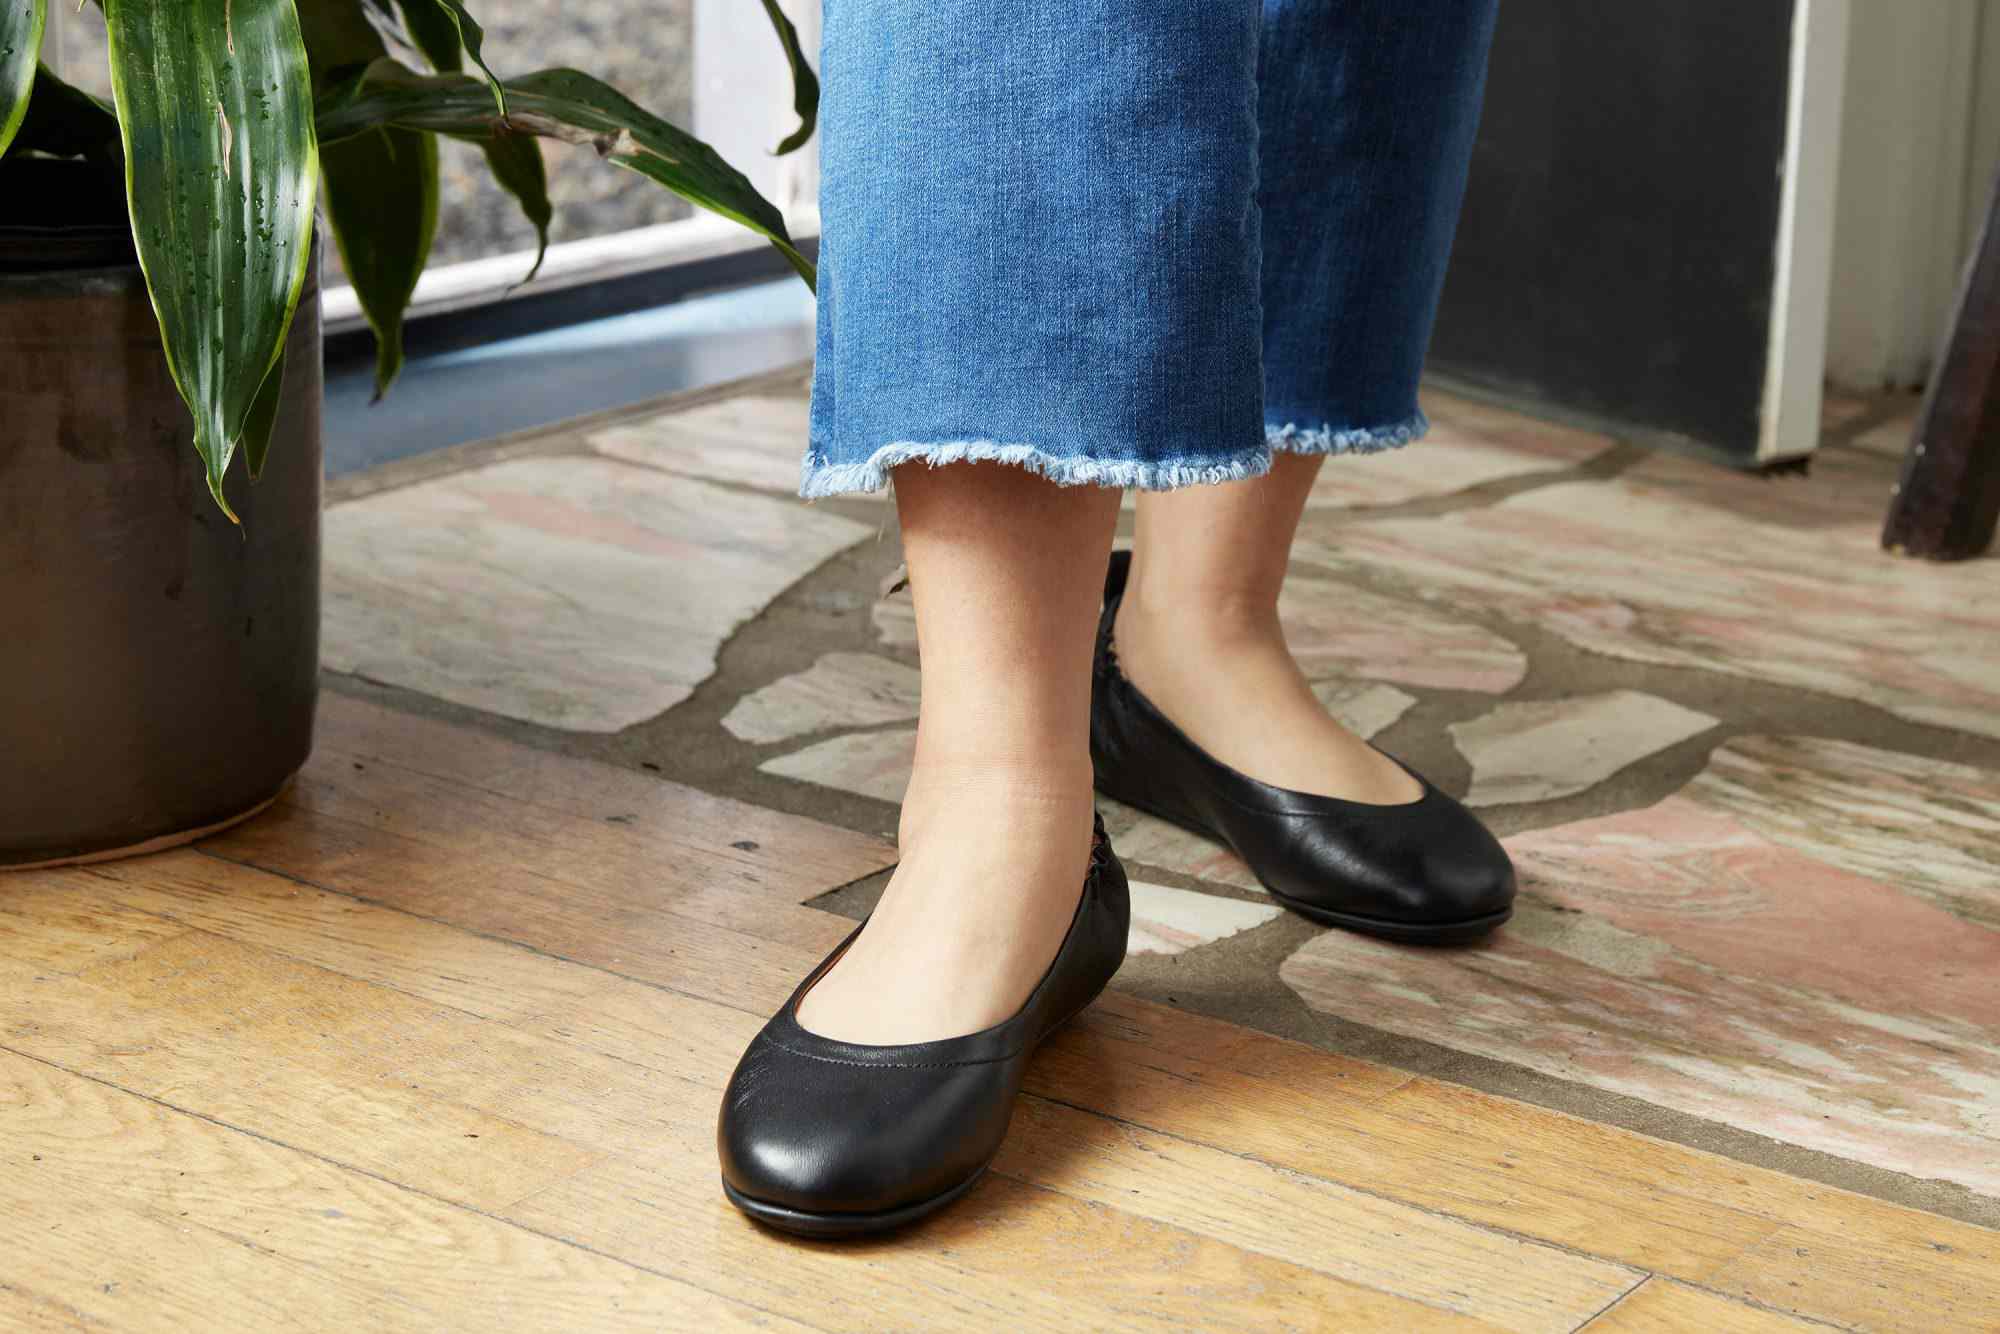 A pair of legs with black FitFlop Allegro Ballet Flats on feet